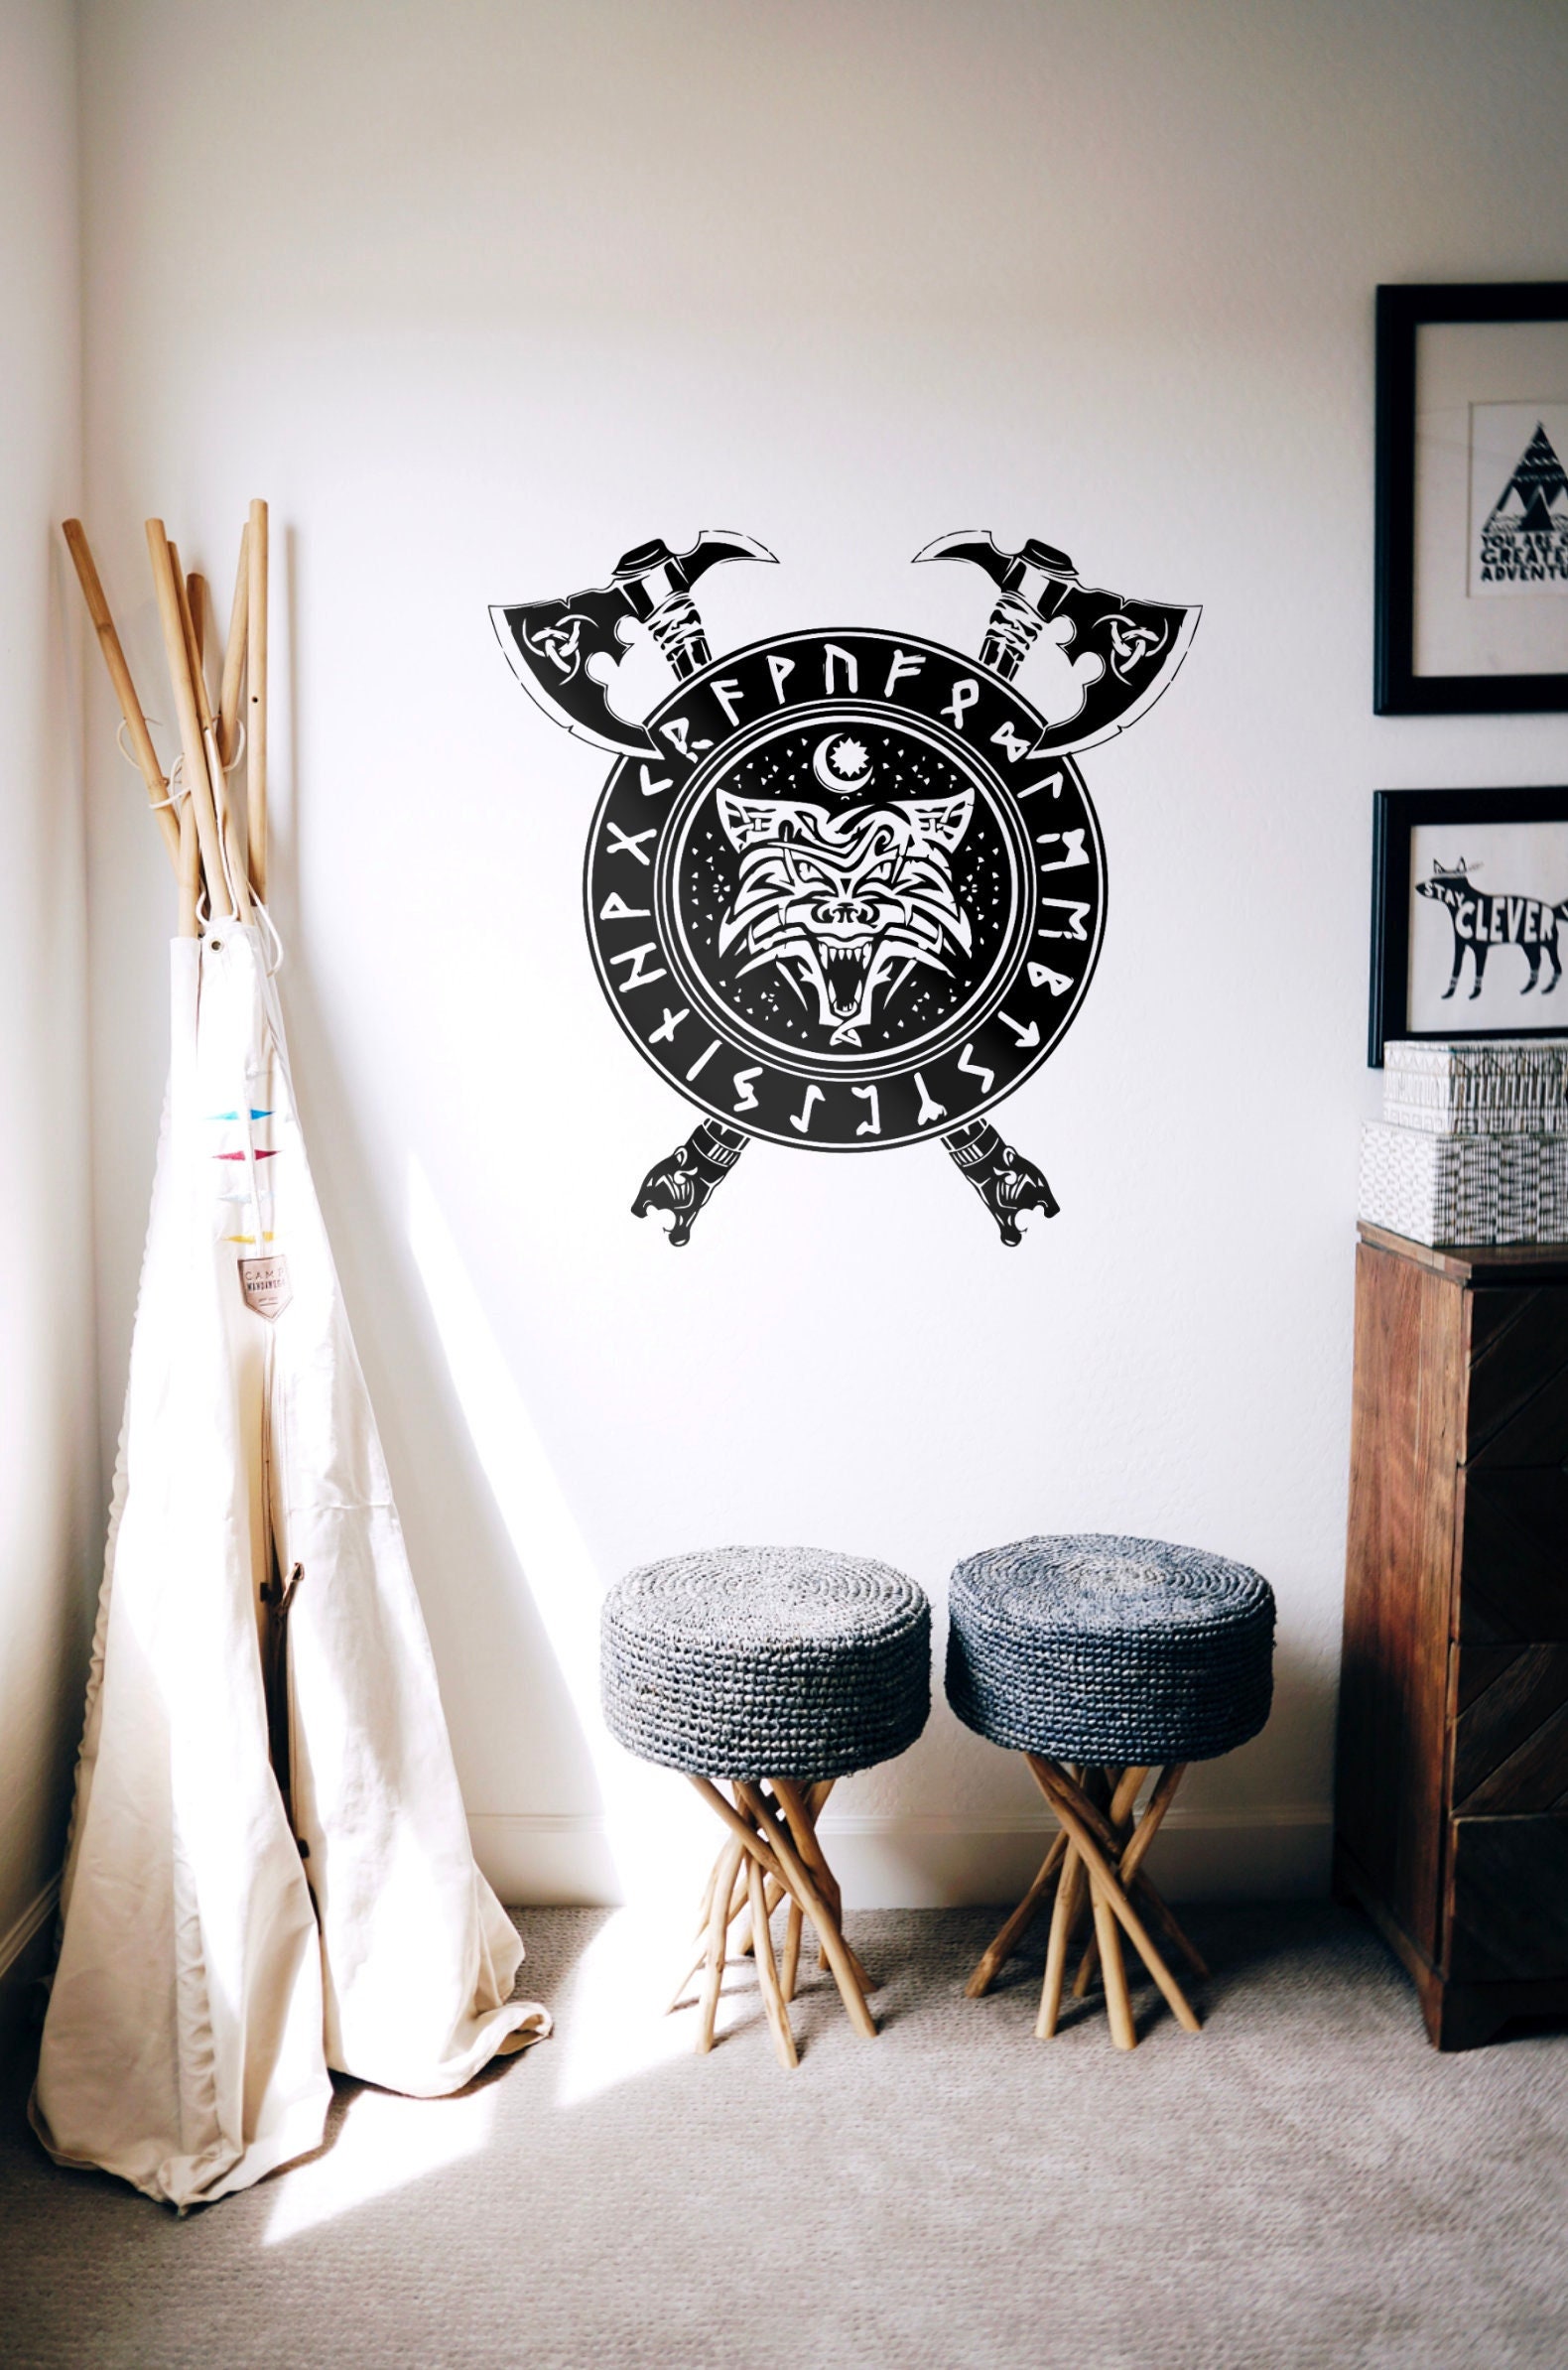 Wolf Wall Sticker - Nordic Style Room Decor for Malaysia